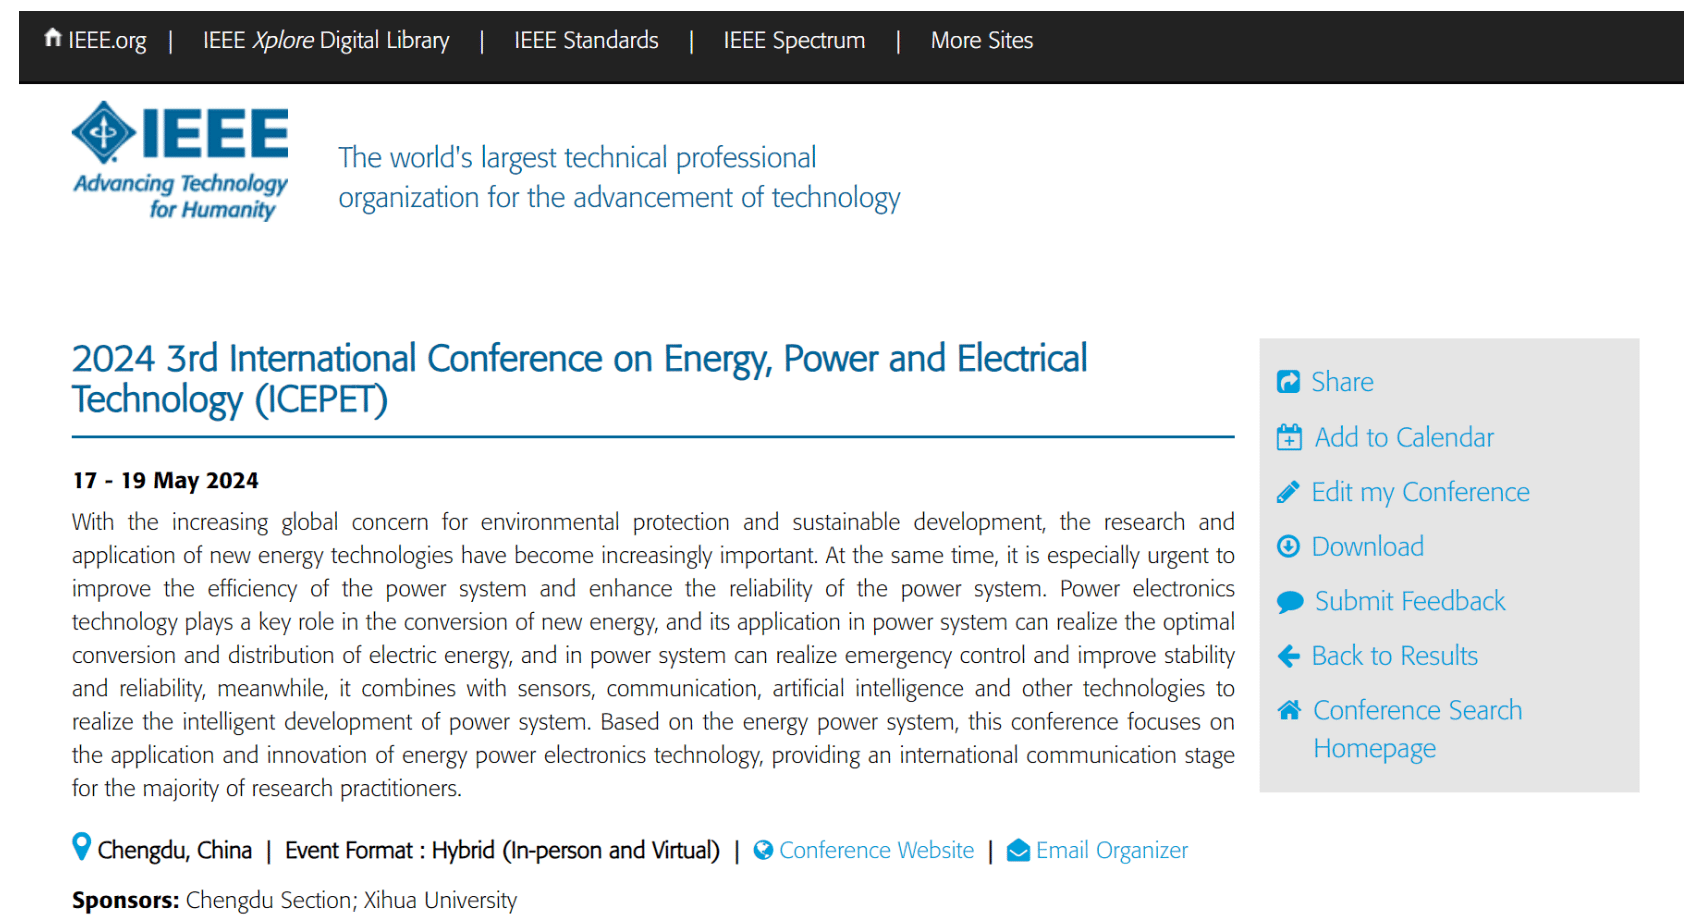 2024 3rd International Conference on Energy, Power and Electrical Technology (ICEPET 2024)